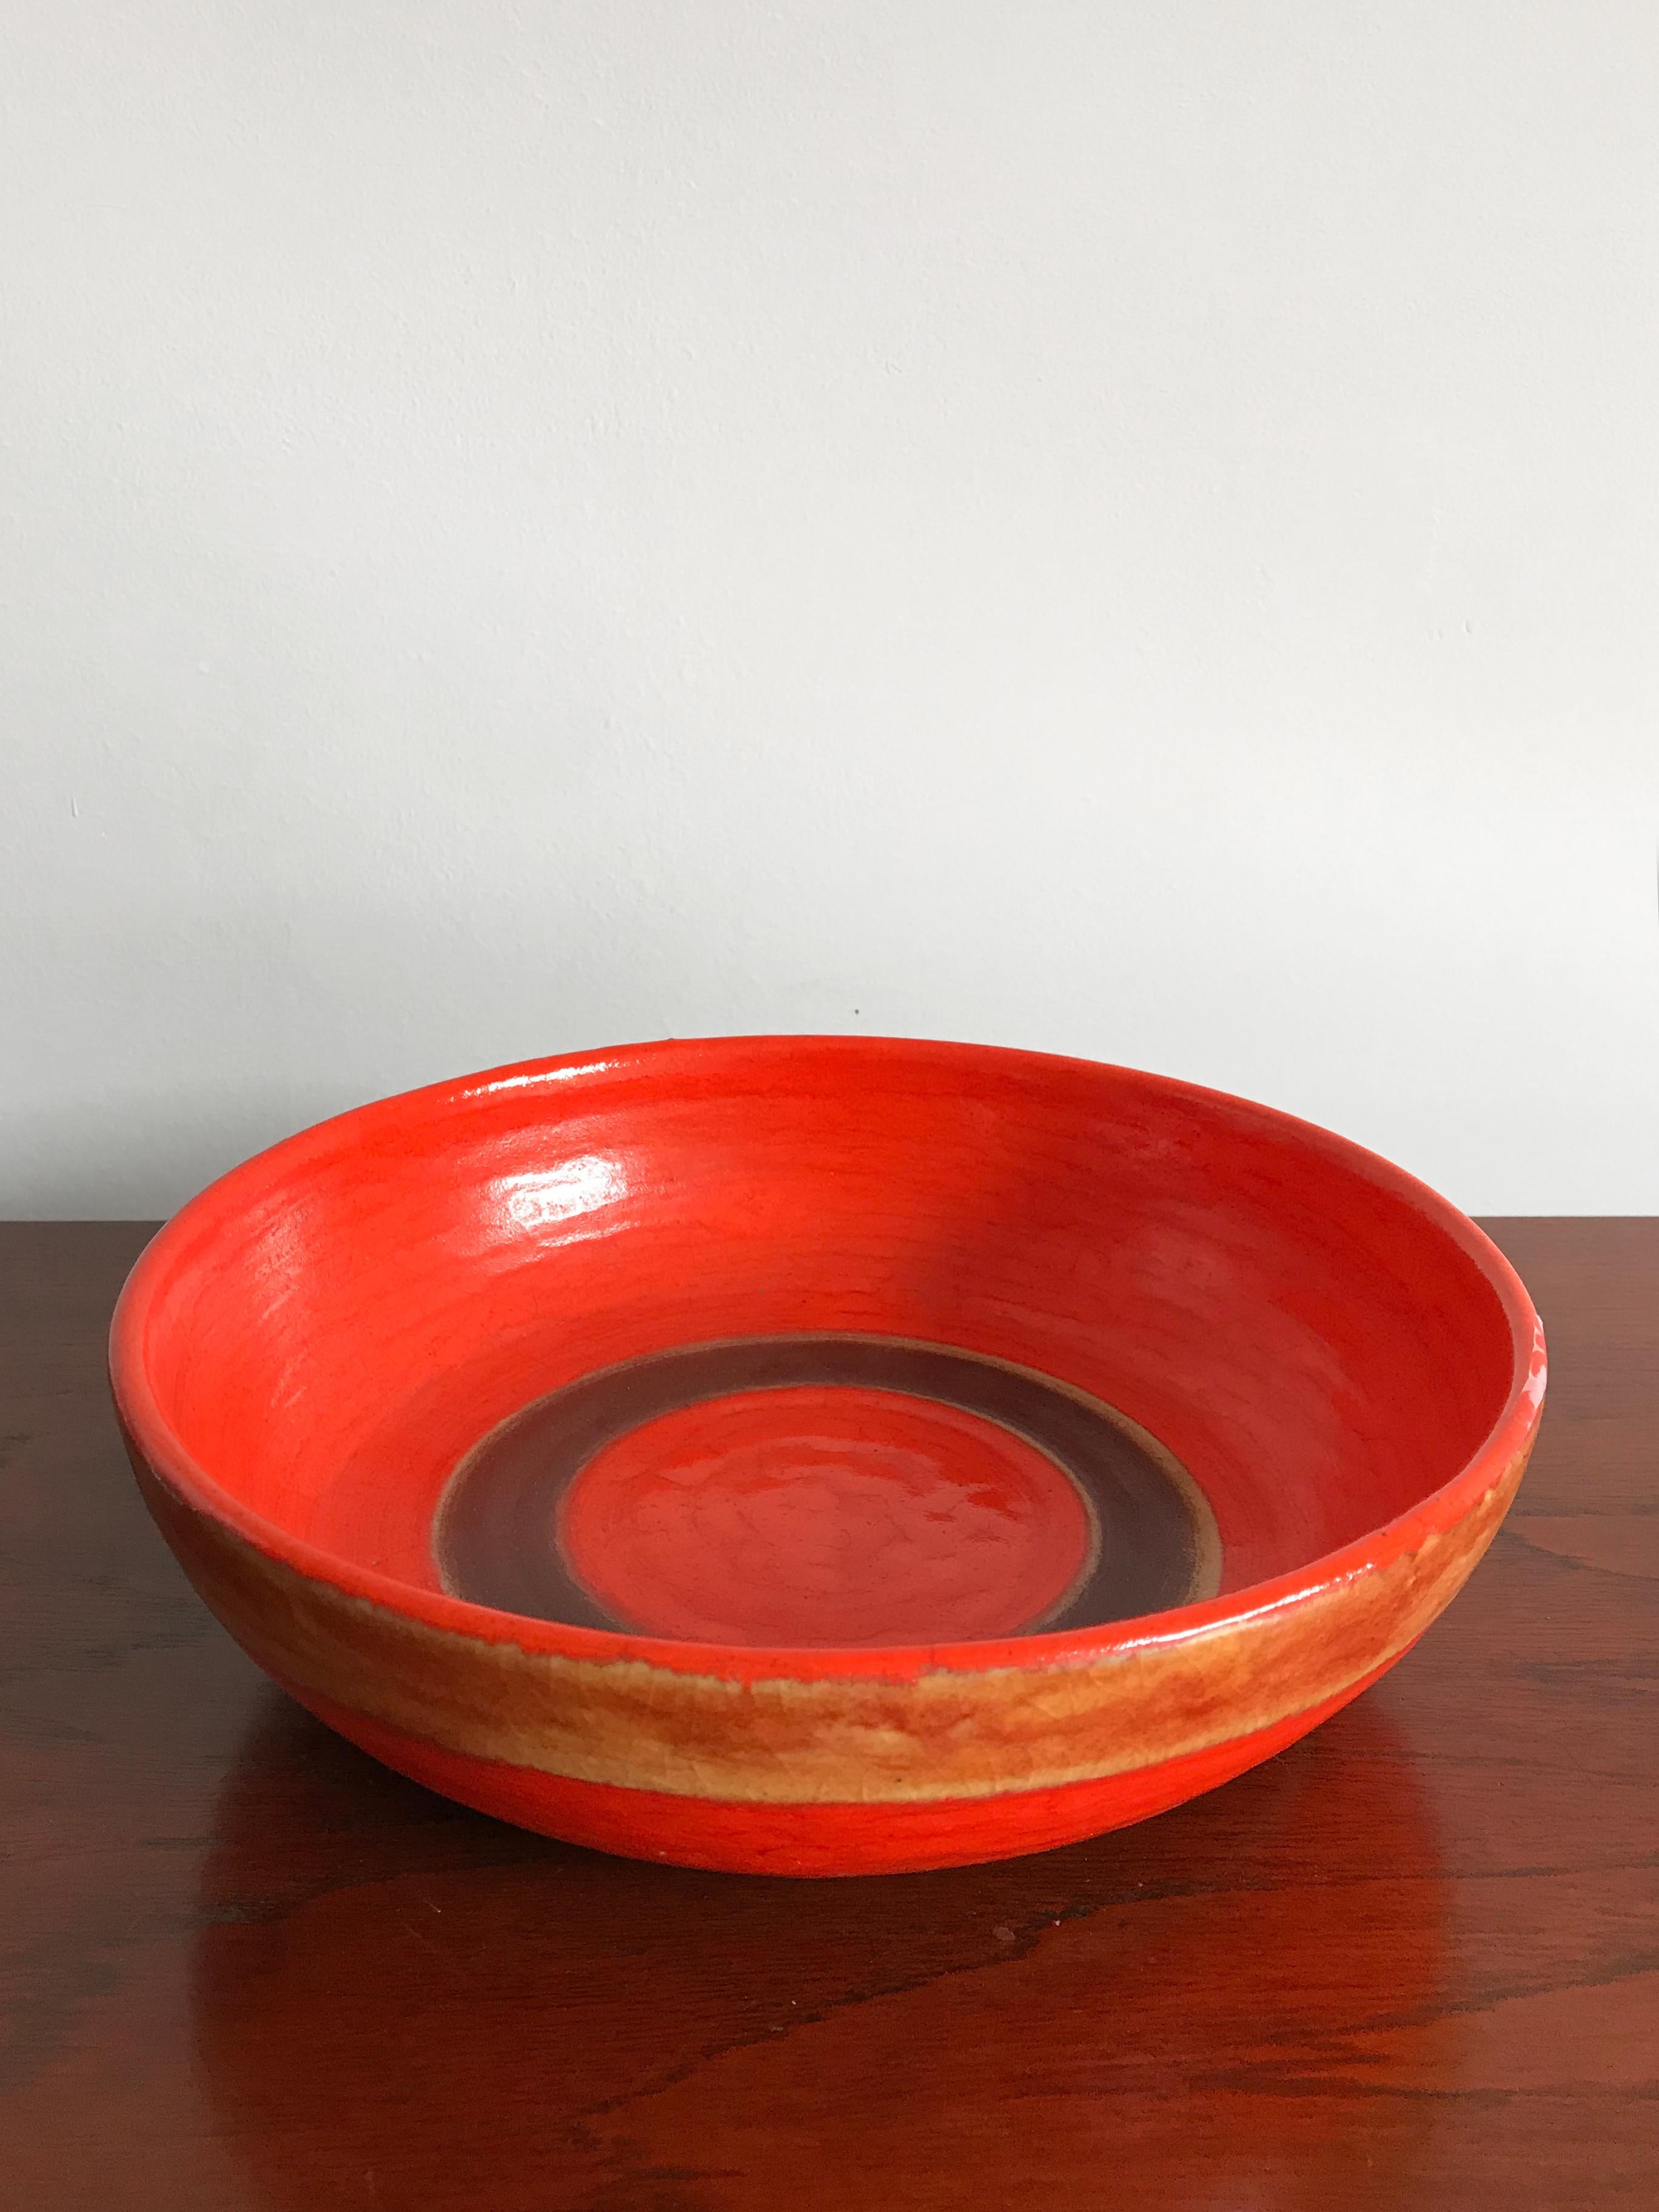 Mid-Century Modern design big ceramic bowl or centerpiece designed by Italian artist Guido Gambone with “Gambone Italy” printed under the base, 1950s.

Please note that the bowl is original of the period and this shows normal signs of age and use.